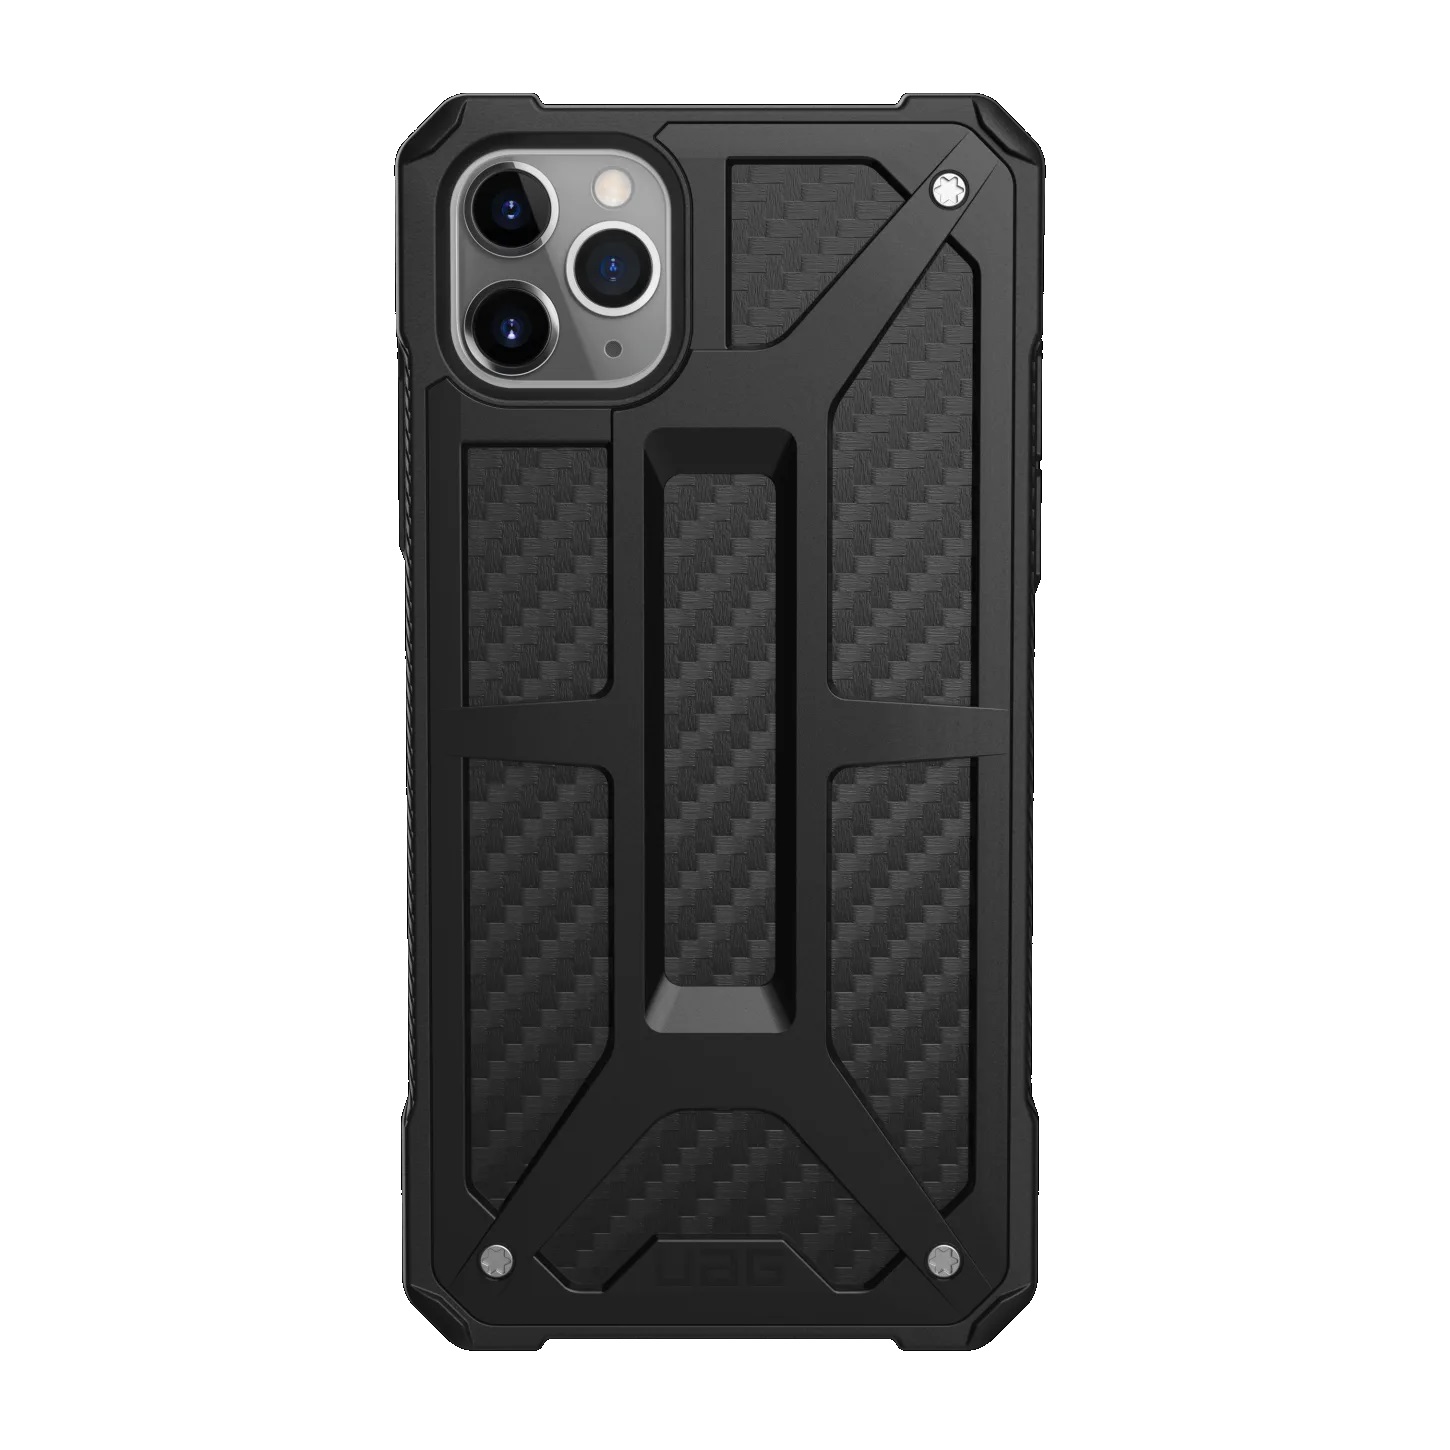 UAG [U] Alton Apple iPhone SE (3rd  2nd Gen) and iPhone 8/iPhone 7 Case - Black (114010314040), 12 ft. Drop Protection (3.6M), Impact-Resistant,Thin